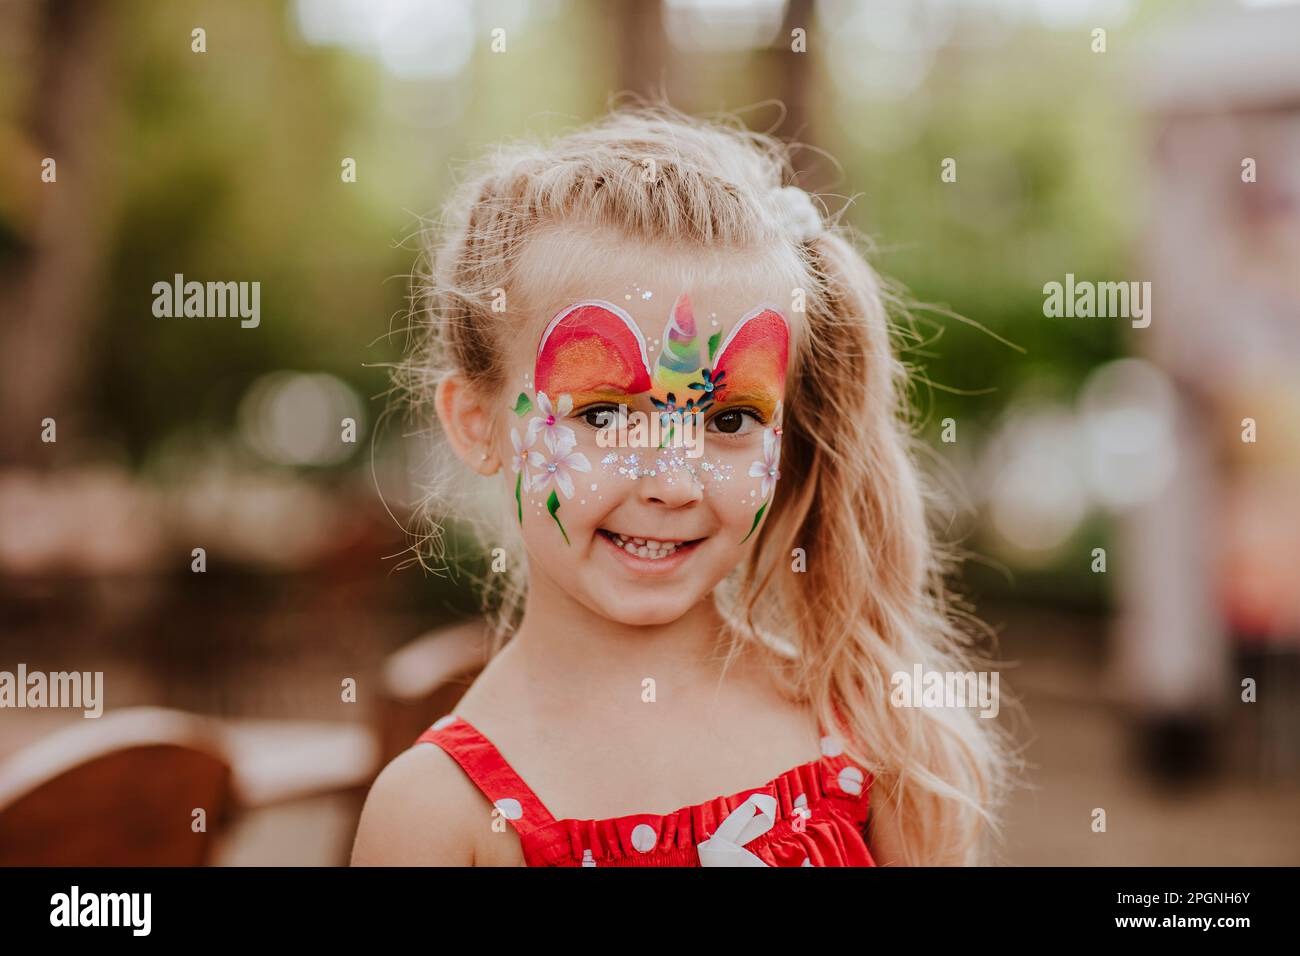 Cute blond girl with face painting Stock Photo